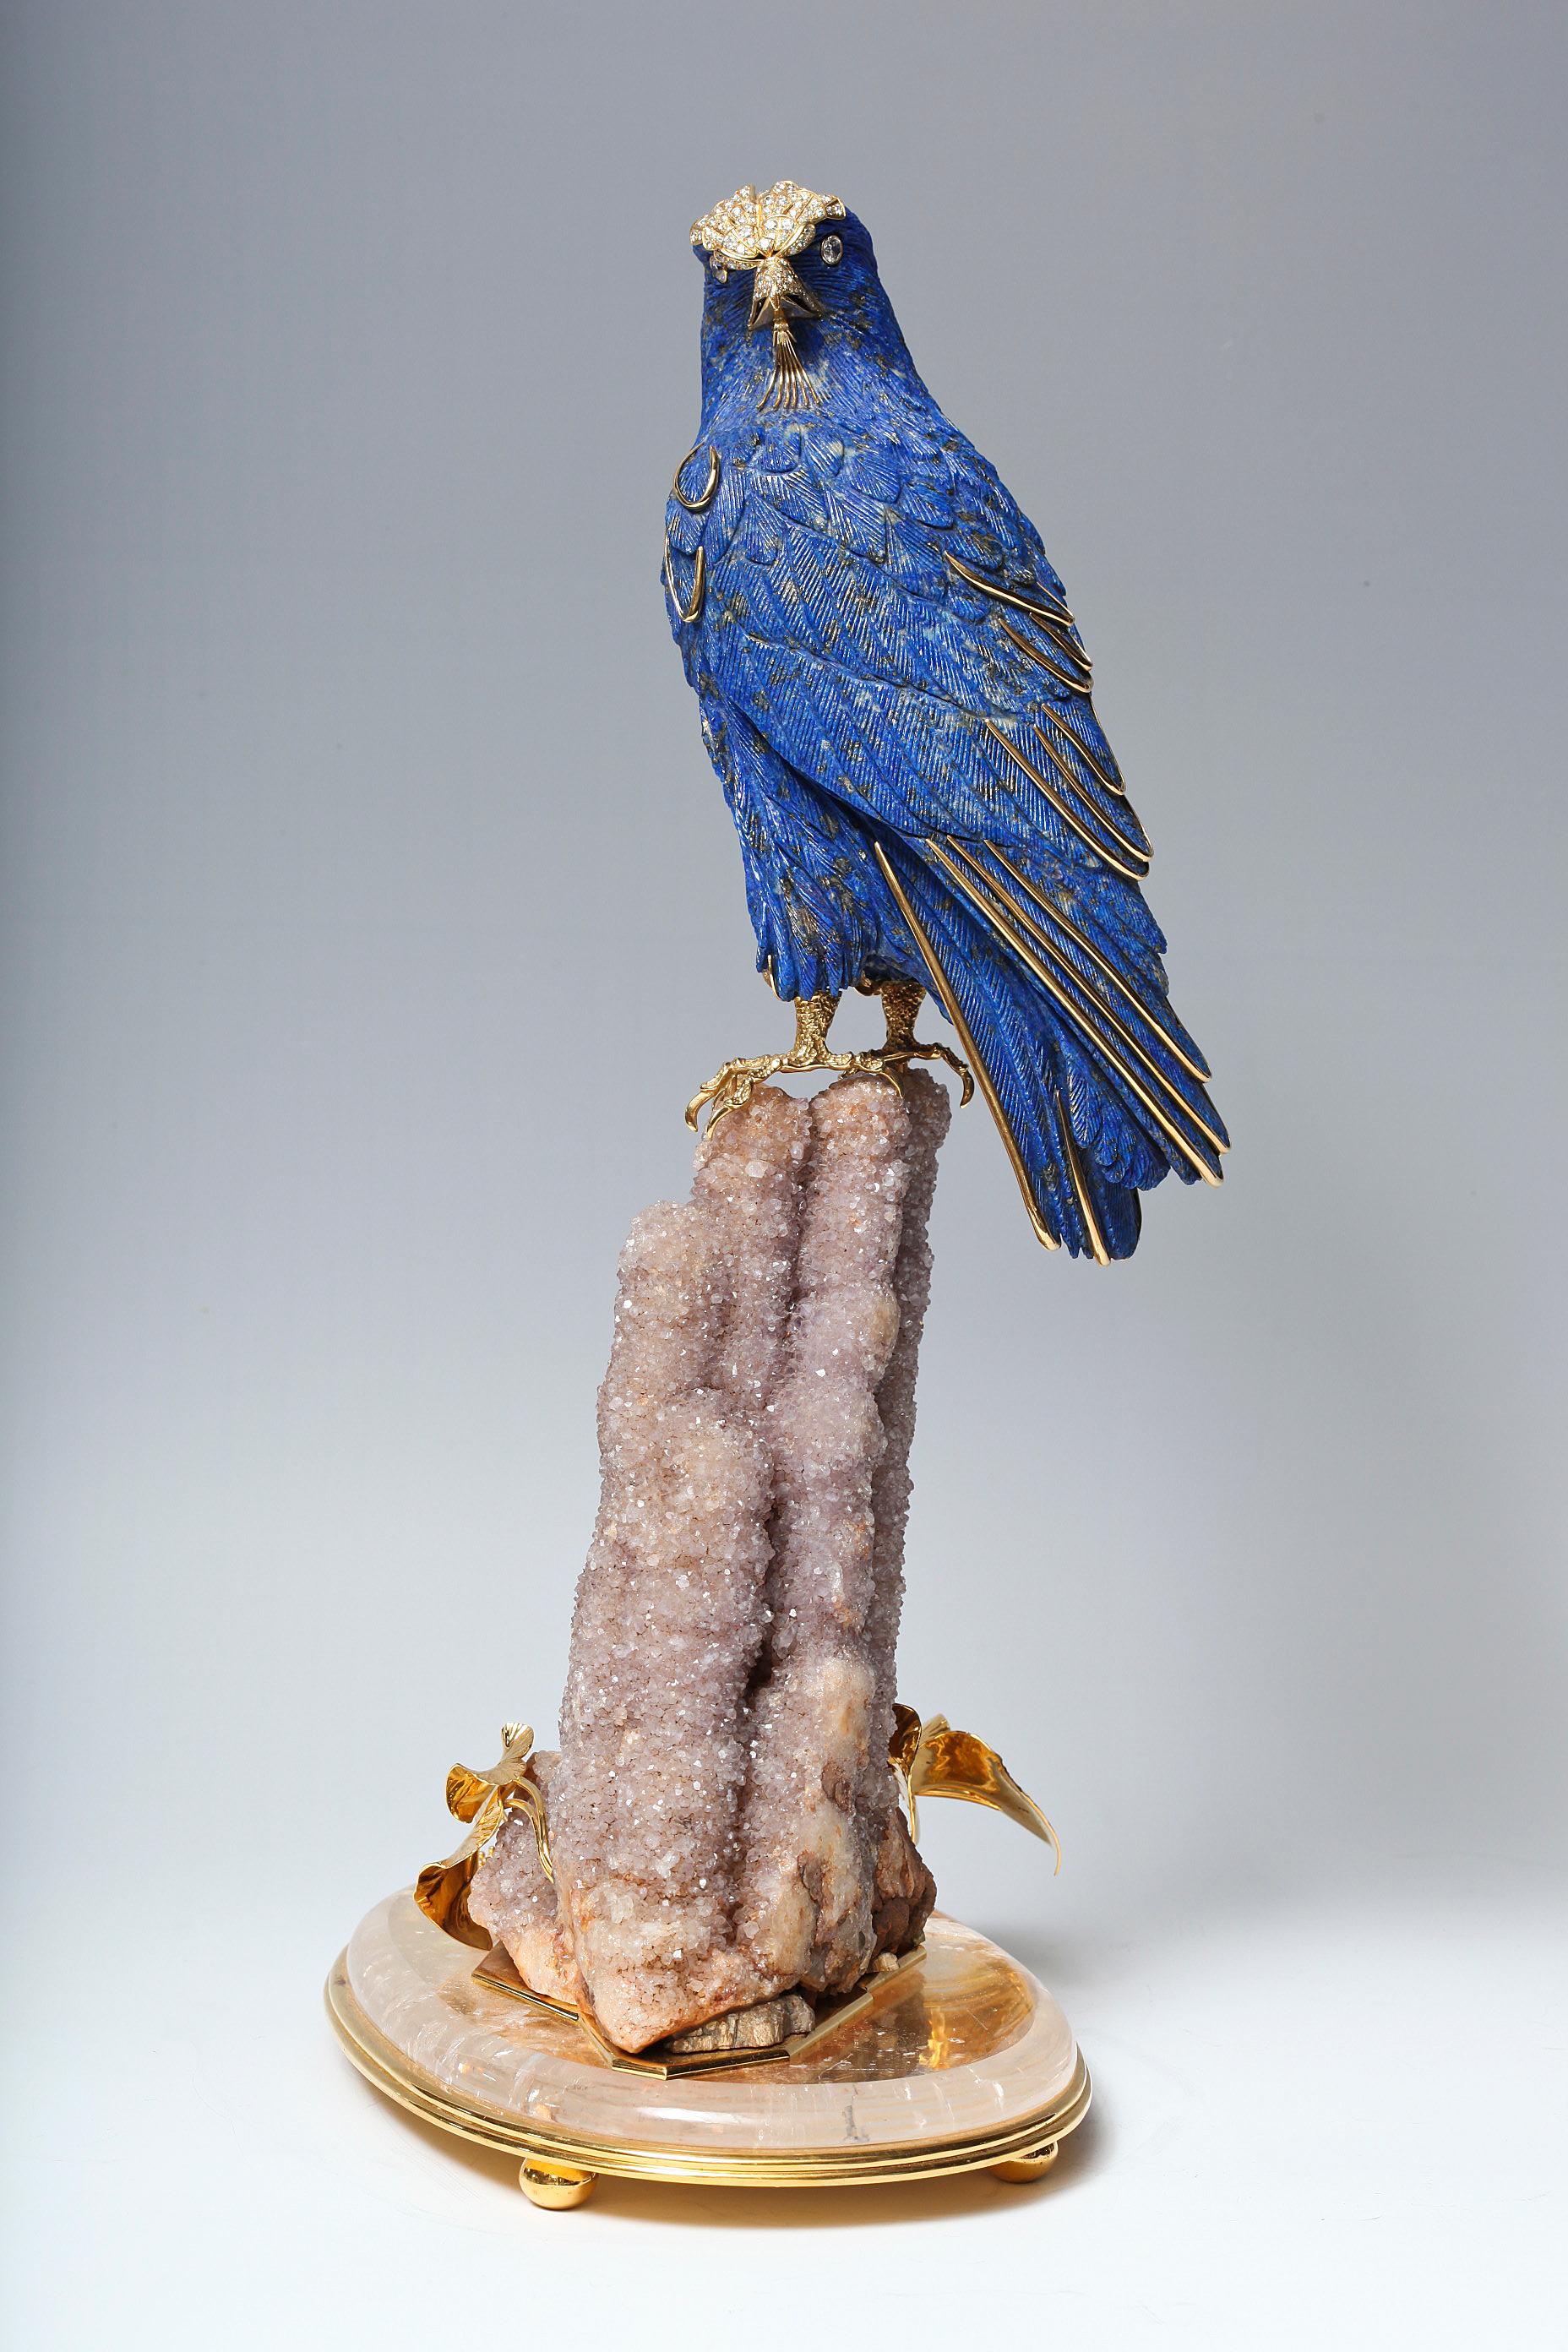 An Important and Rare Jeweled and Gold, Lapis Lazuli Falcon by Asprey & Co. of London, signed. Exceptionally made with 18K gold (seven hundred fifty), silver (nine hundred twenty five), diamonds, lapis lazuli, clear rock crystal quartz, and branched